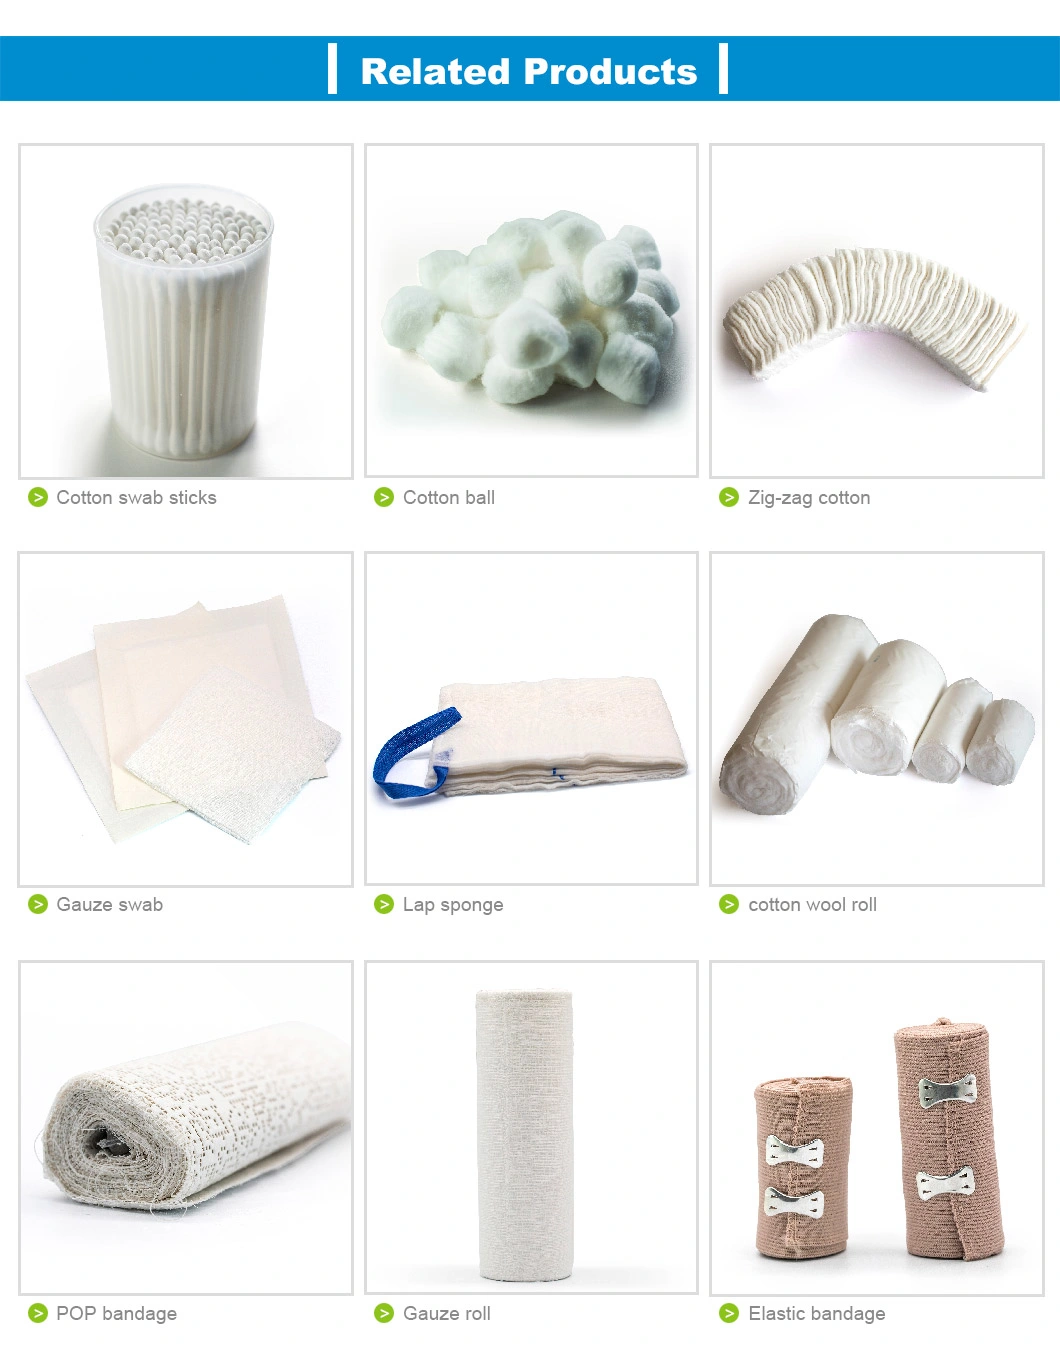 Medical Polyester Orthopedic Fiberglass Casting Tape with High Strength